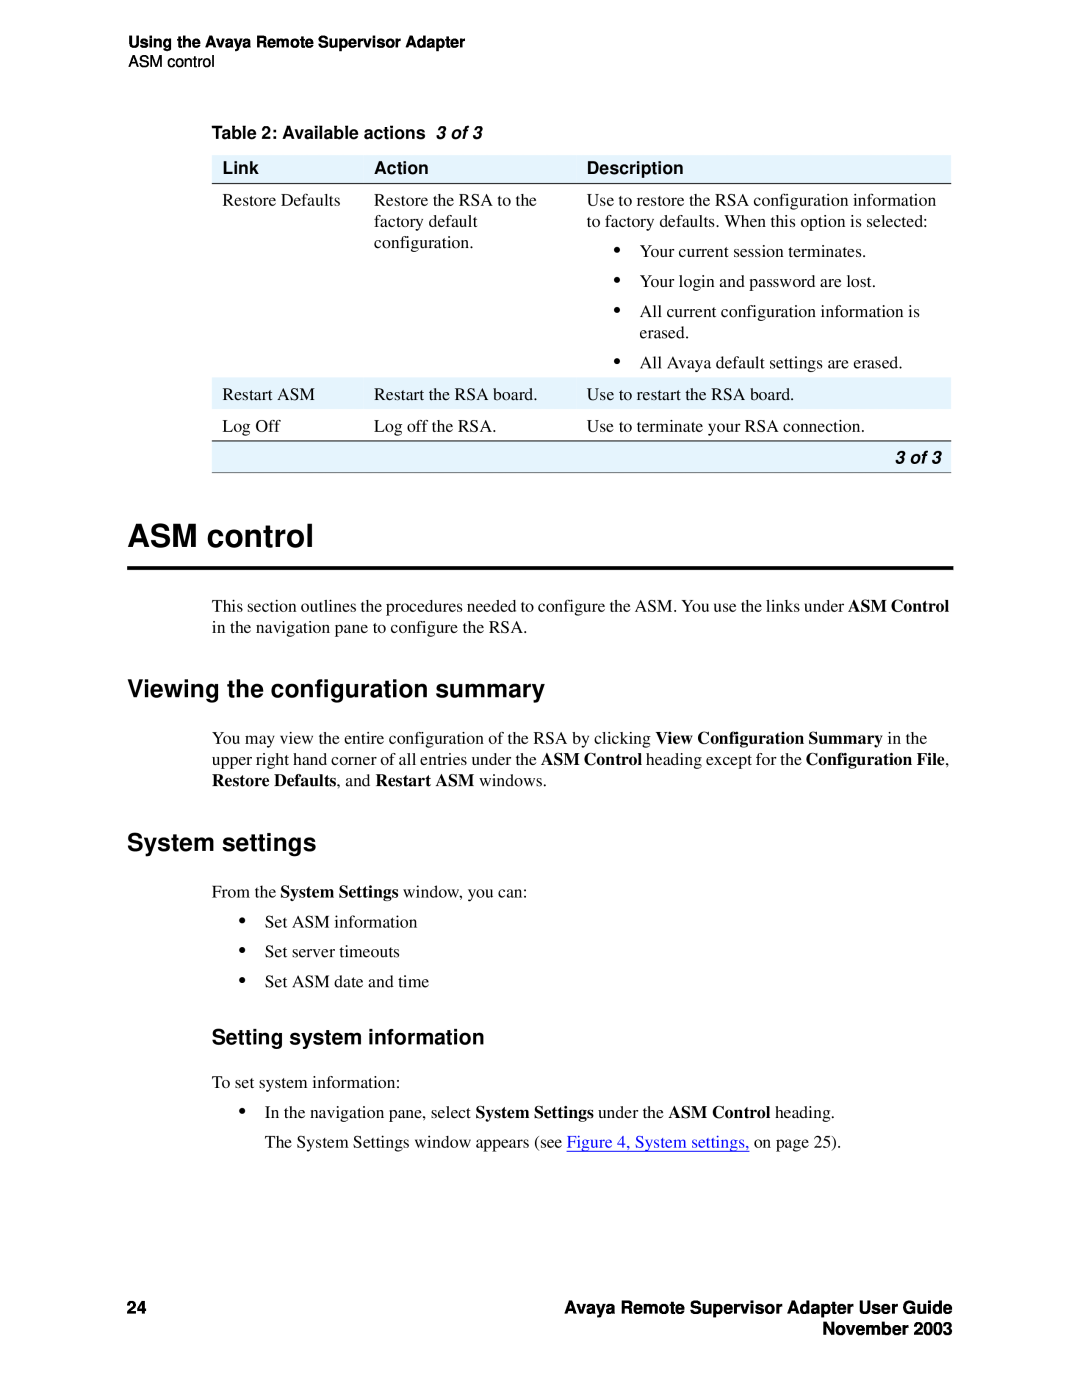 Avaya S8500 ASM control, Viewing the configuration summary, System settings, Setting system information, Link, Action 